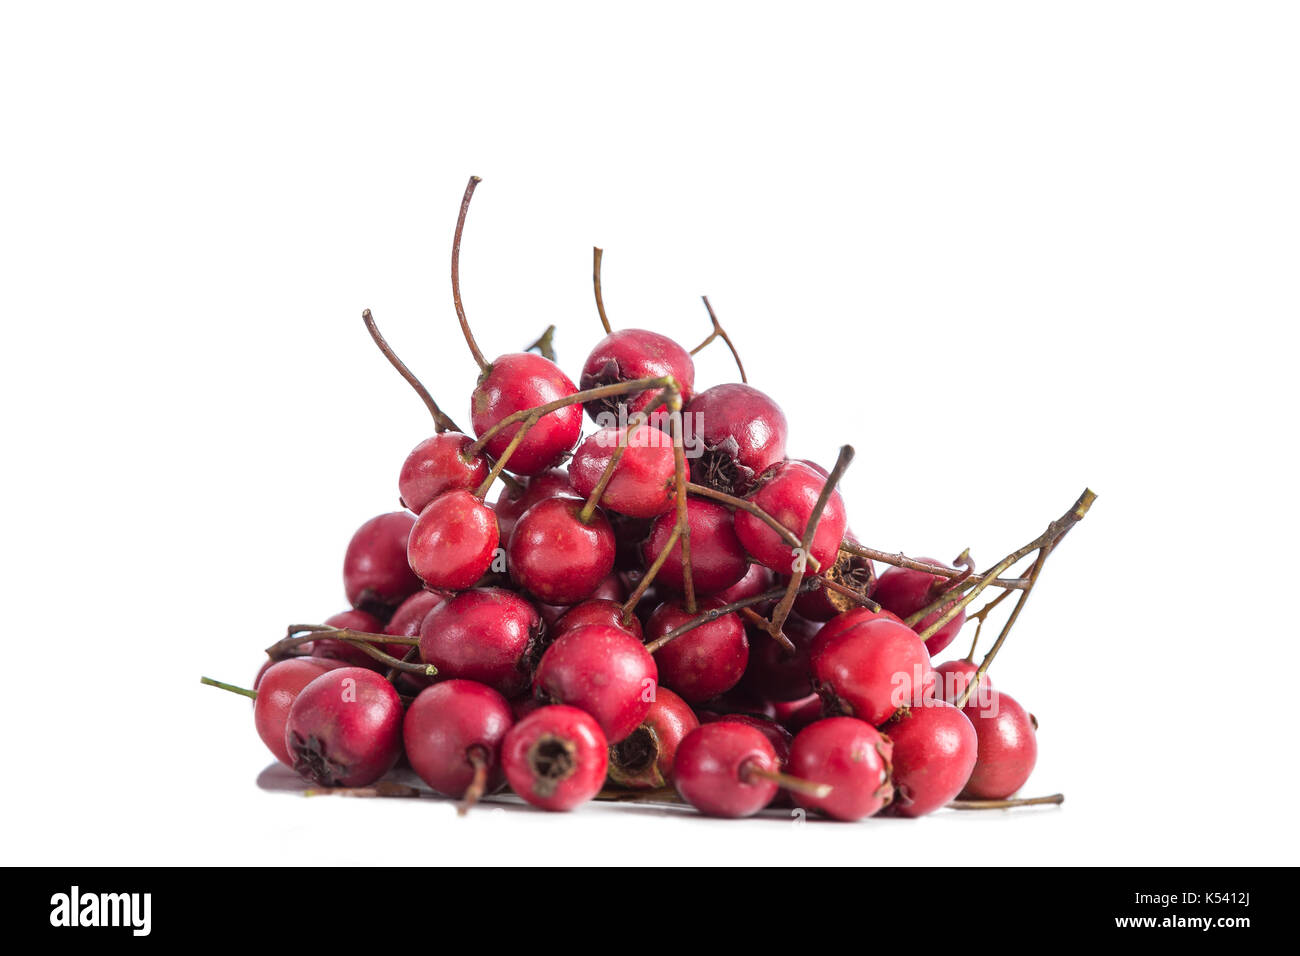 pile of red hawthorn berries Crataegus cut out on white background Stock Photo